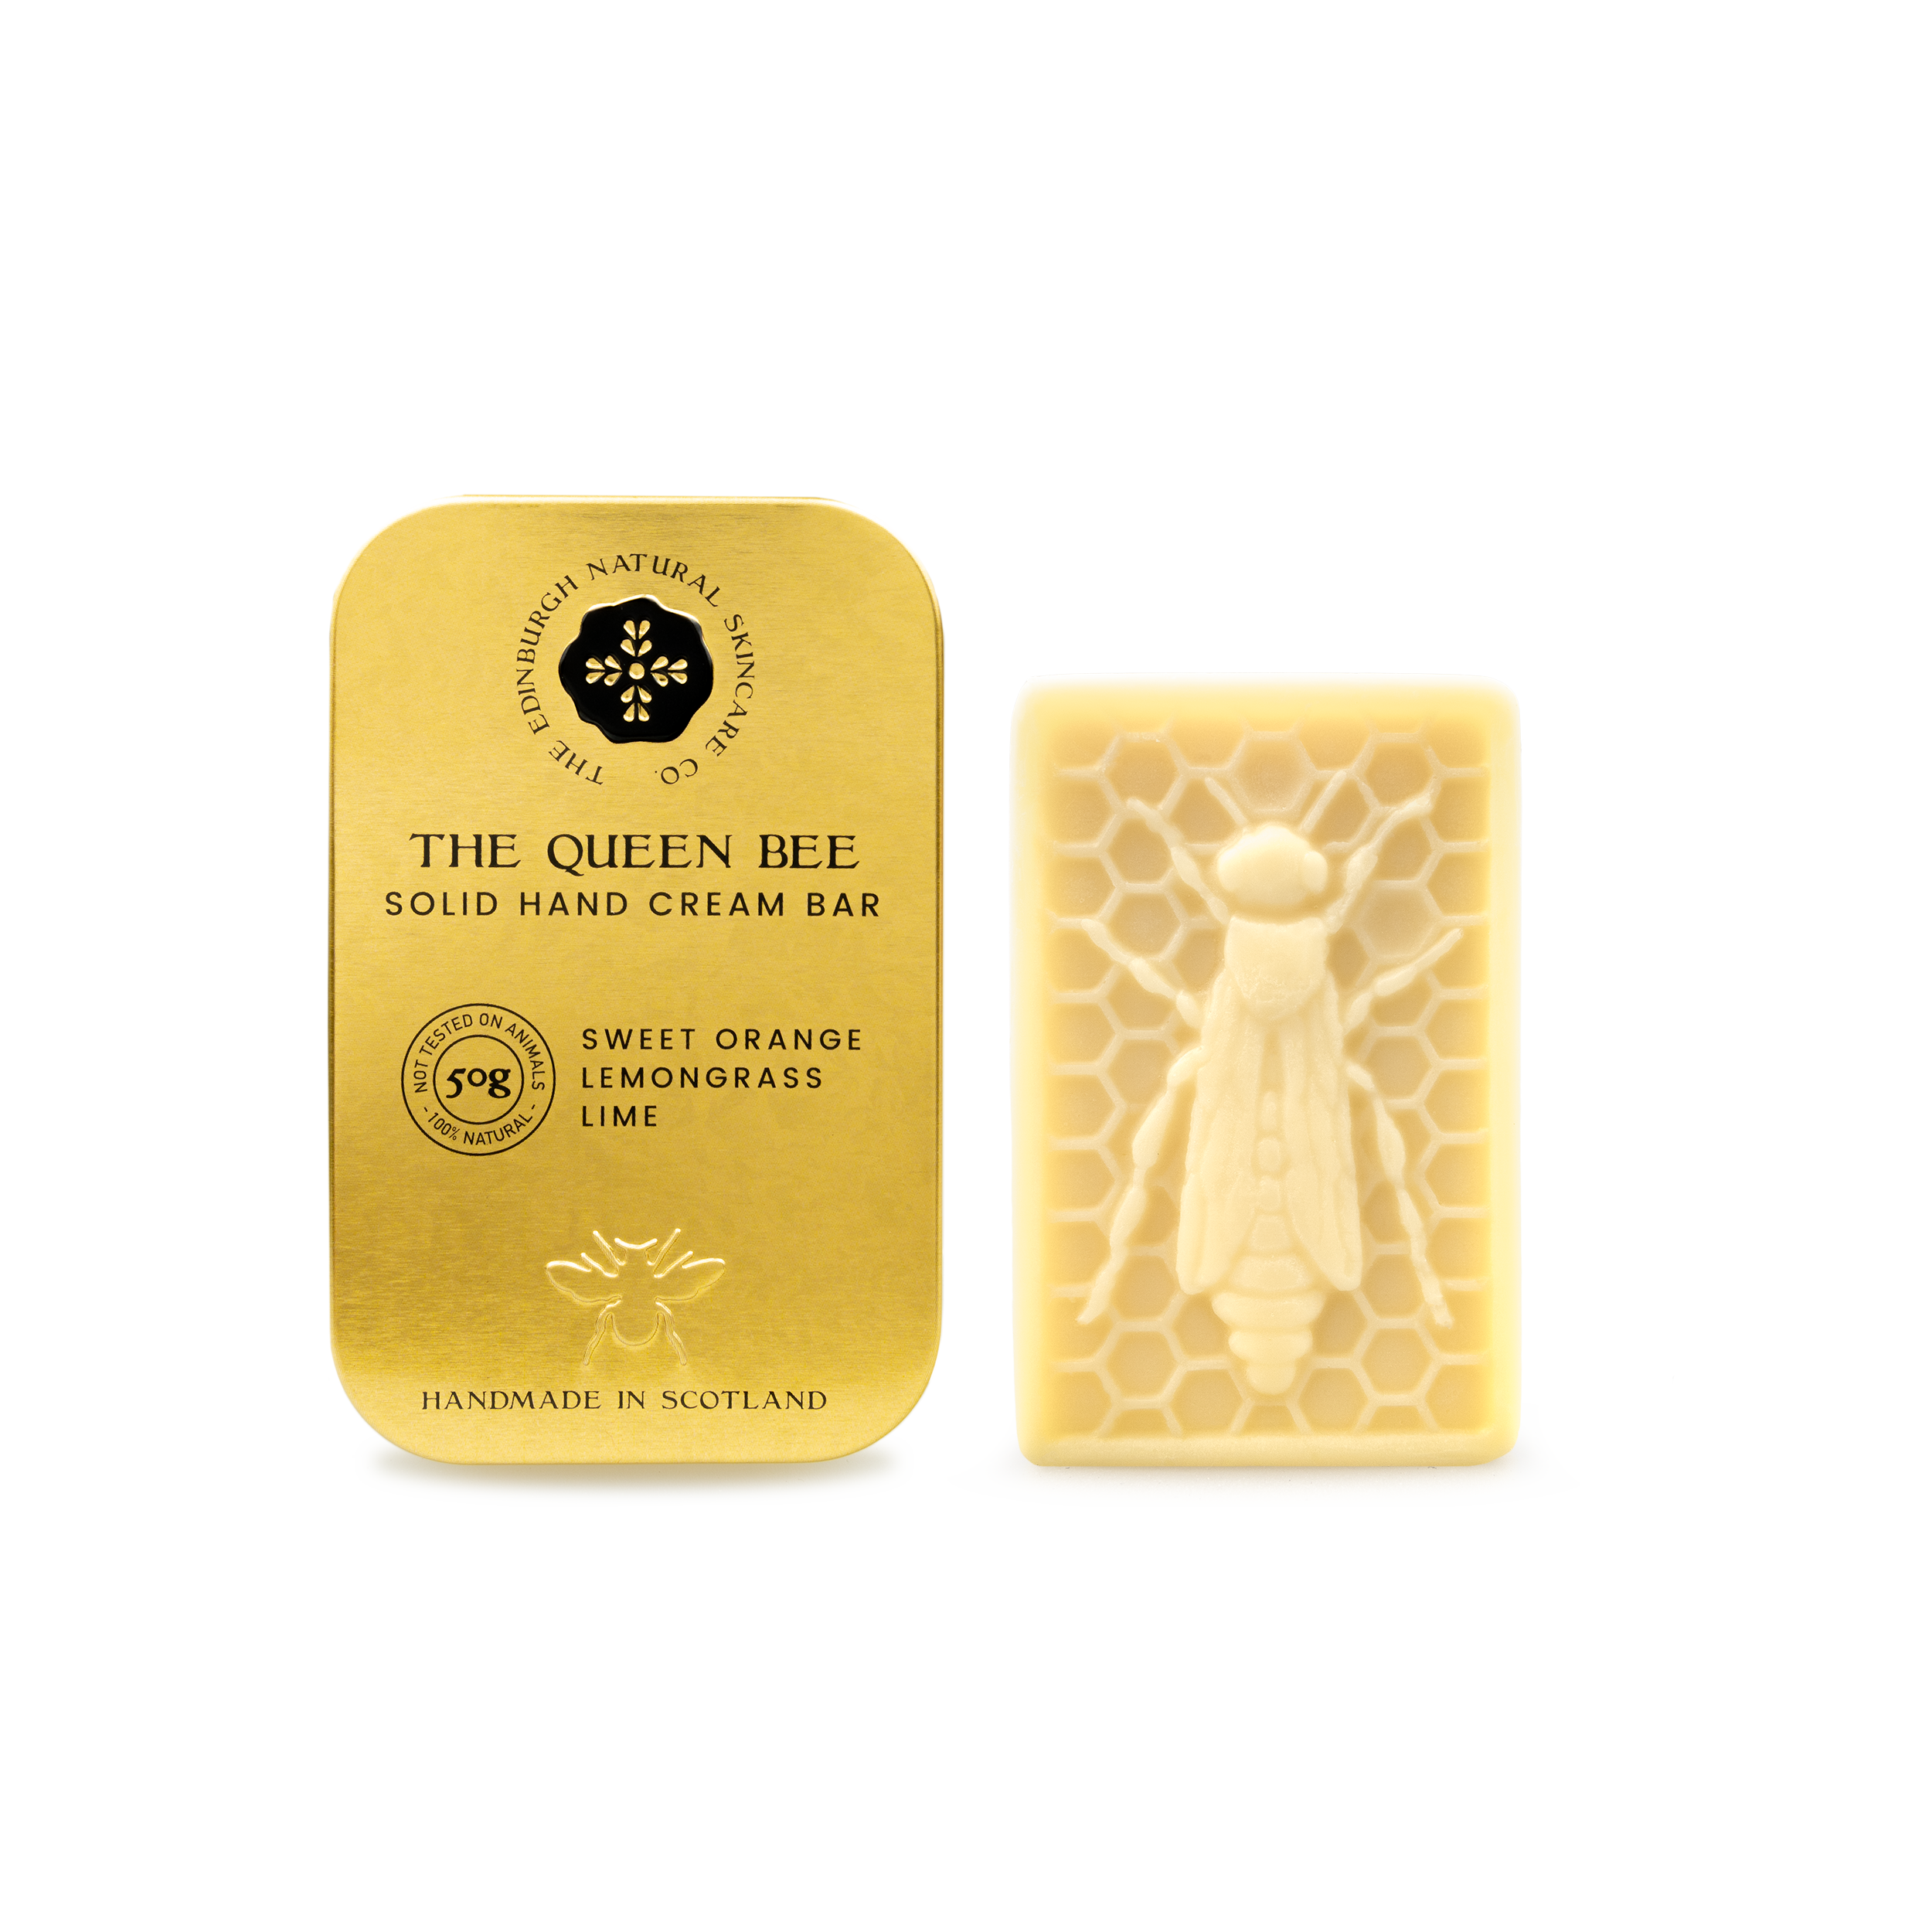 THE QUEEN BEE HAND CREAM BAR. LOVED WORLDWIDE FOR IT'S CITRUS ZING AND BEAUTIFUL GOLD TIN